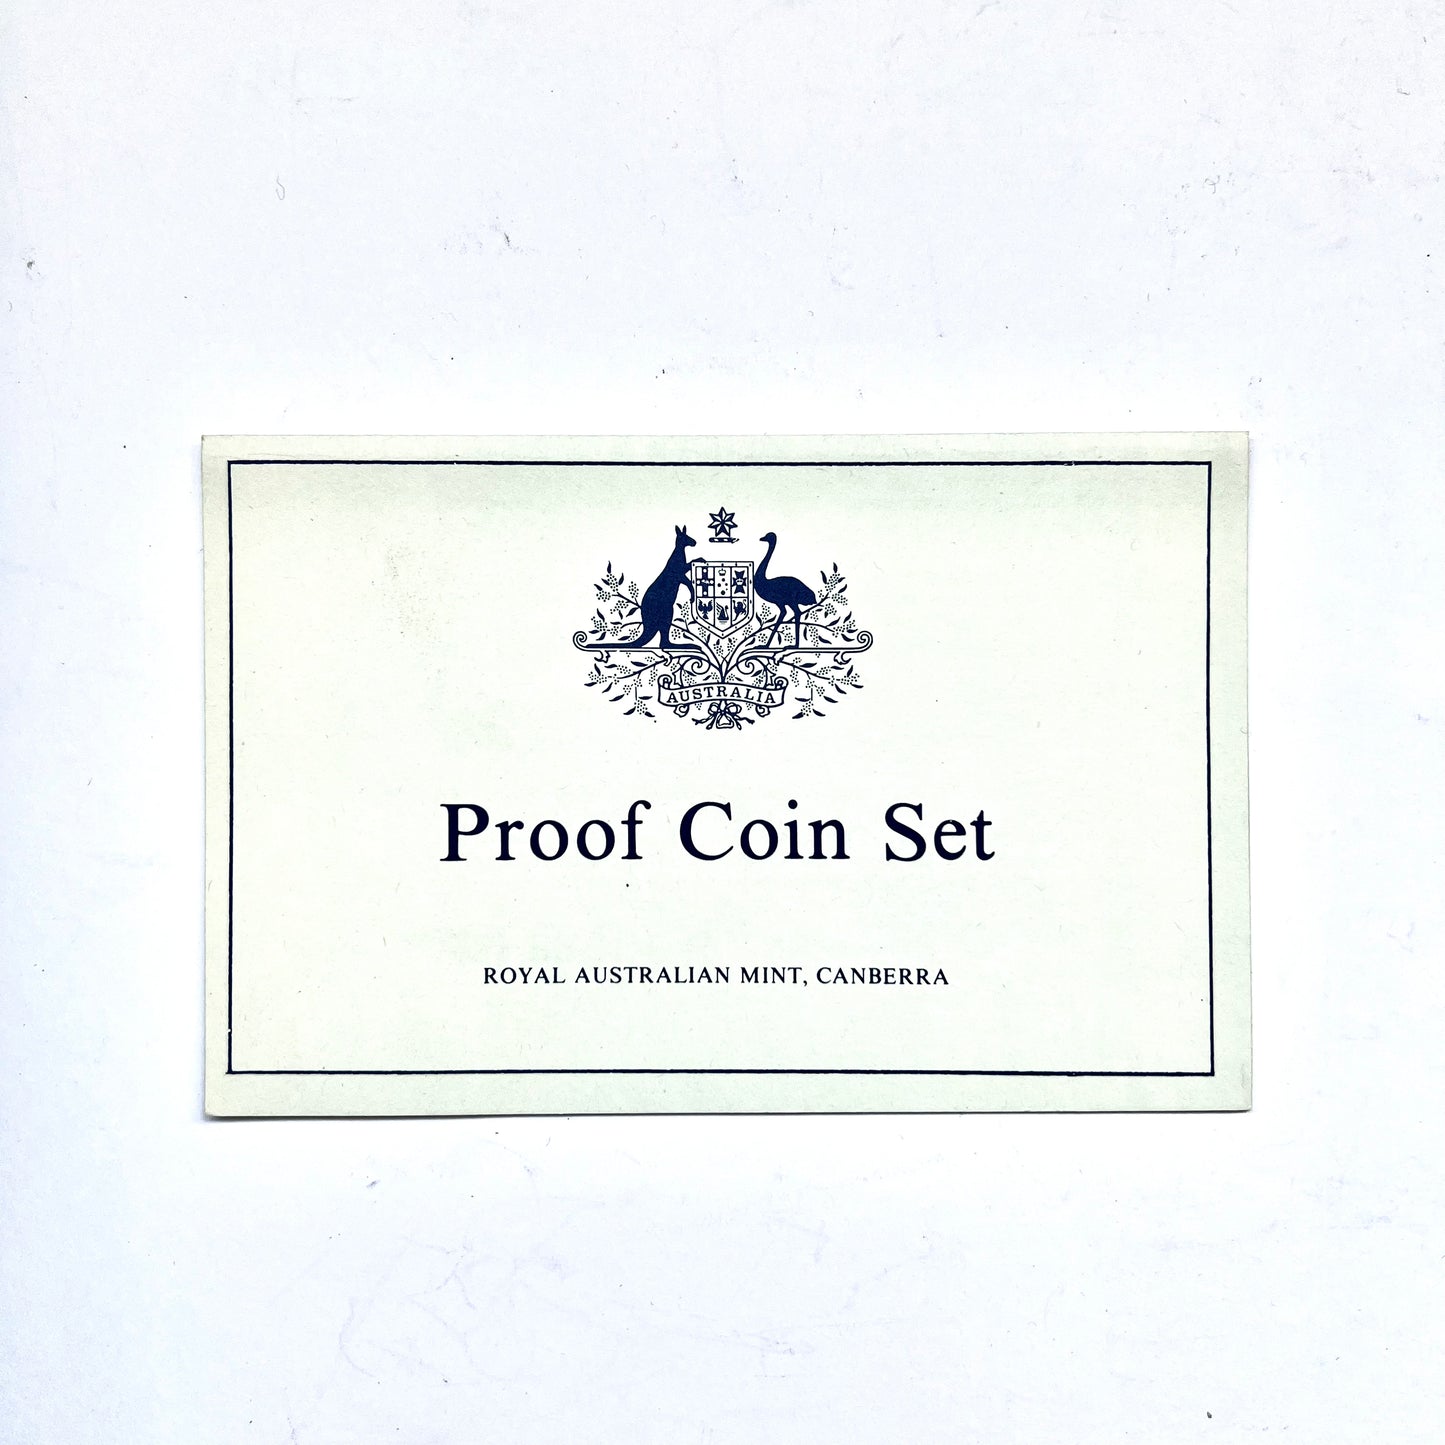 Australian 1985 Proof Coin Set, issued by the Royal Australian Mint.